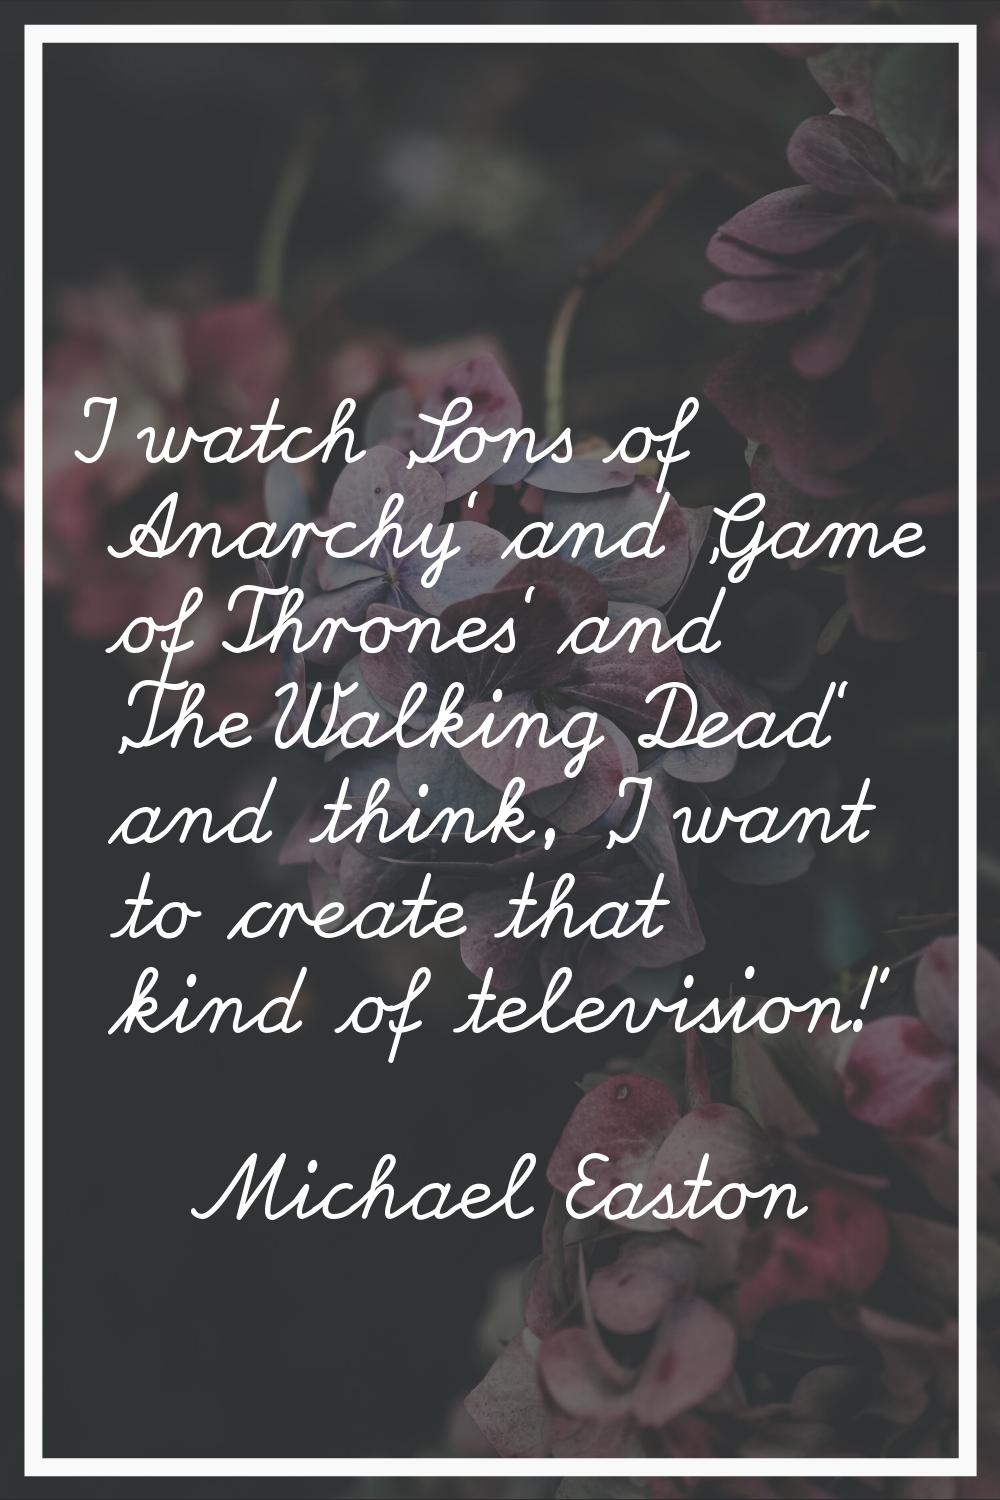 I watch 'Sons of Anarchy' and 'Game of Thrones' and 'The Walking Dead' and think, 'I want to create